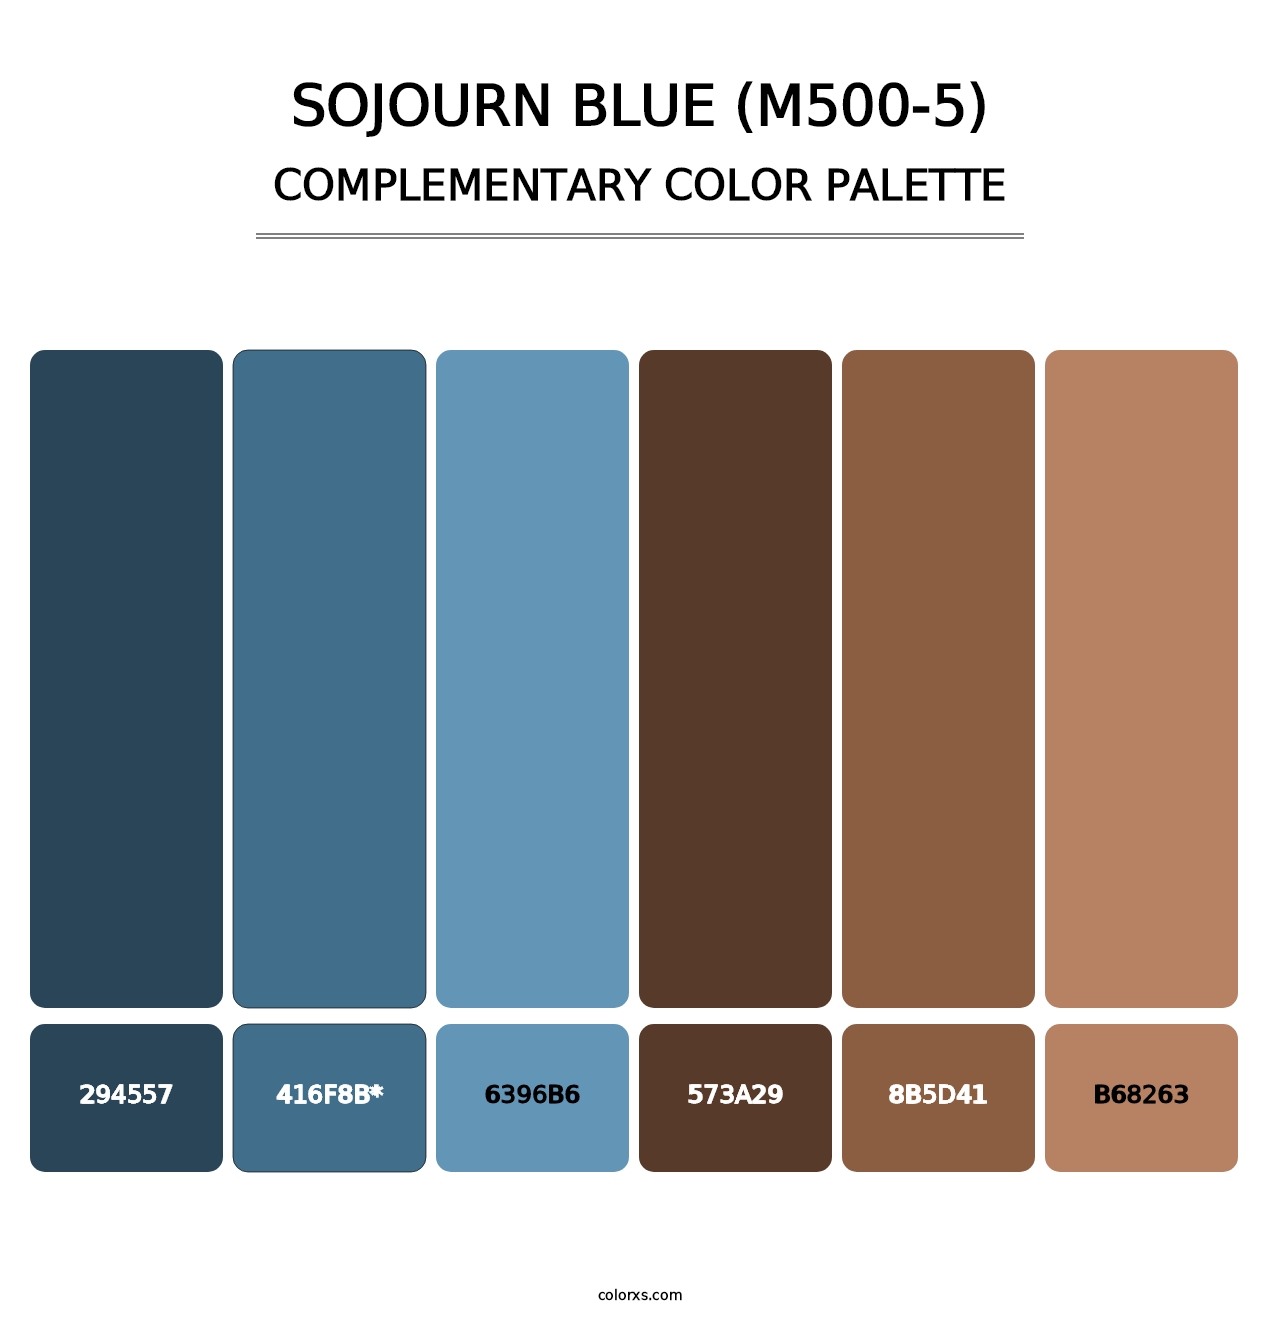 Sojourn Blue (M500-5) - Complementary Color Palette